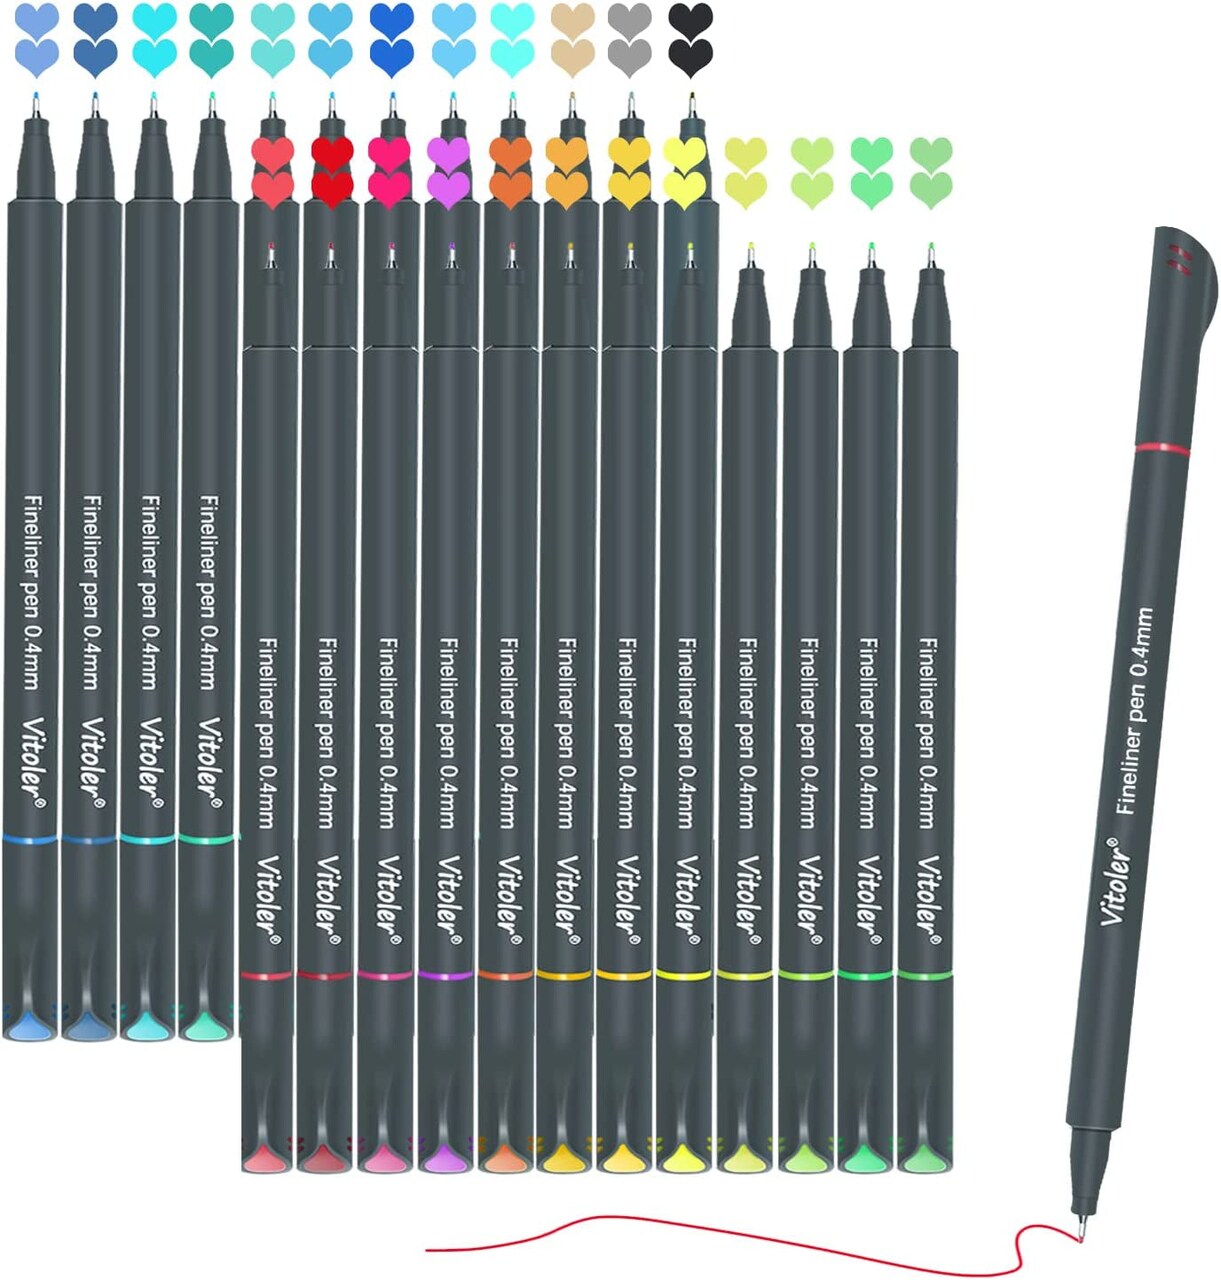 Pens,Colored Pens,Fine Tip Pens,24Pc 0.4Mm Journaling Pens,Colored Fine  Point Pens,School Supplies,Pens for Kids Adult Art Note Taking Drawing